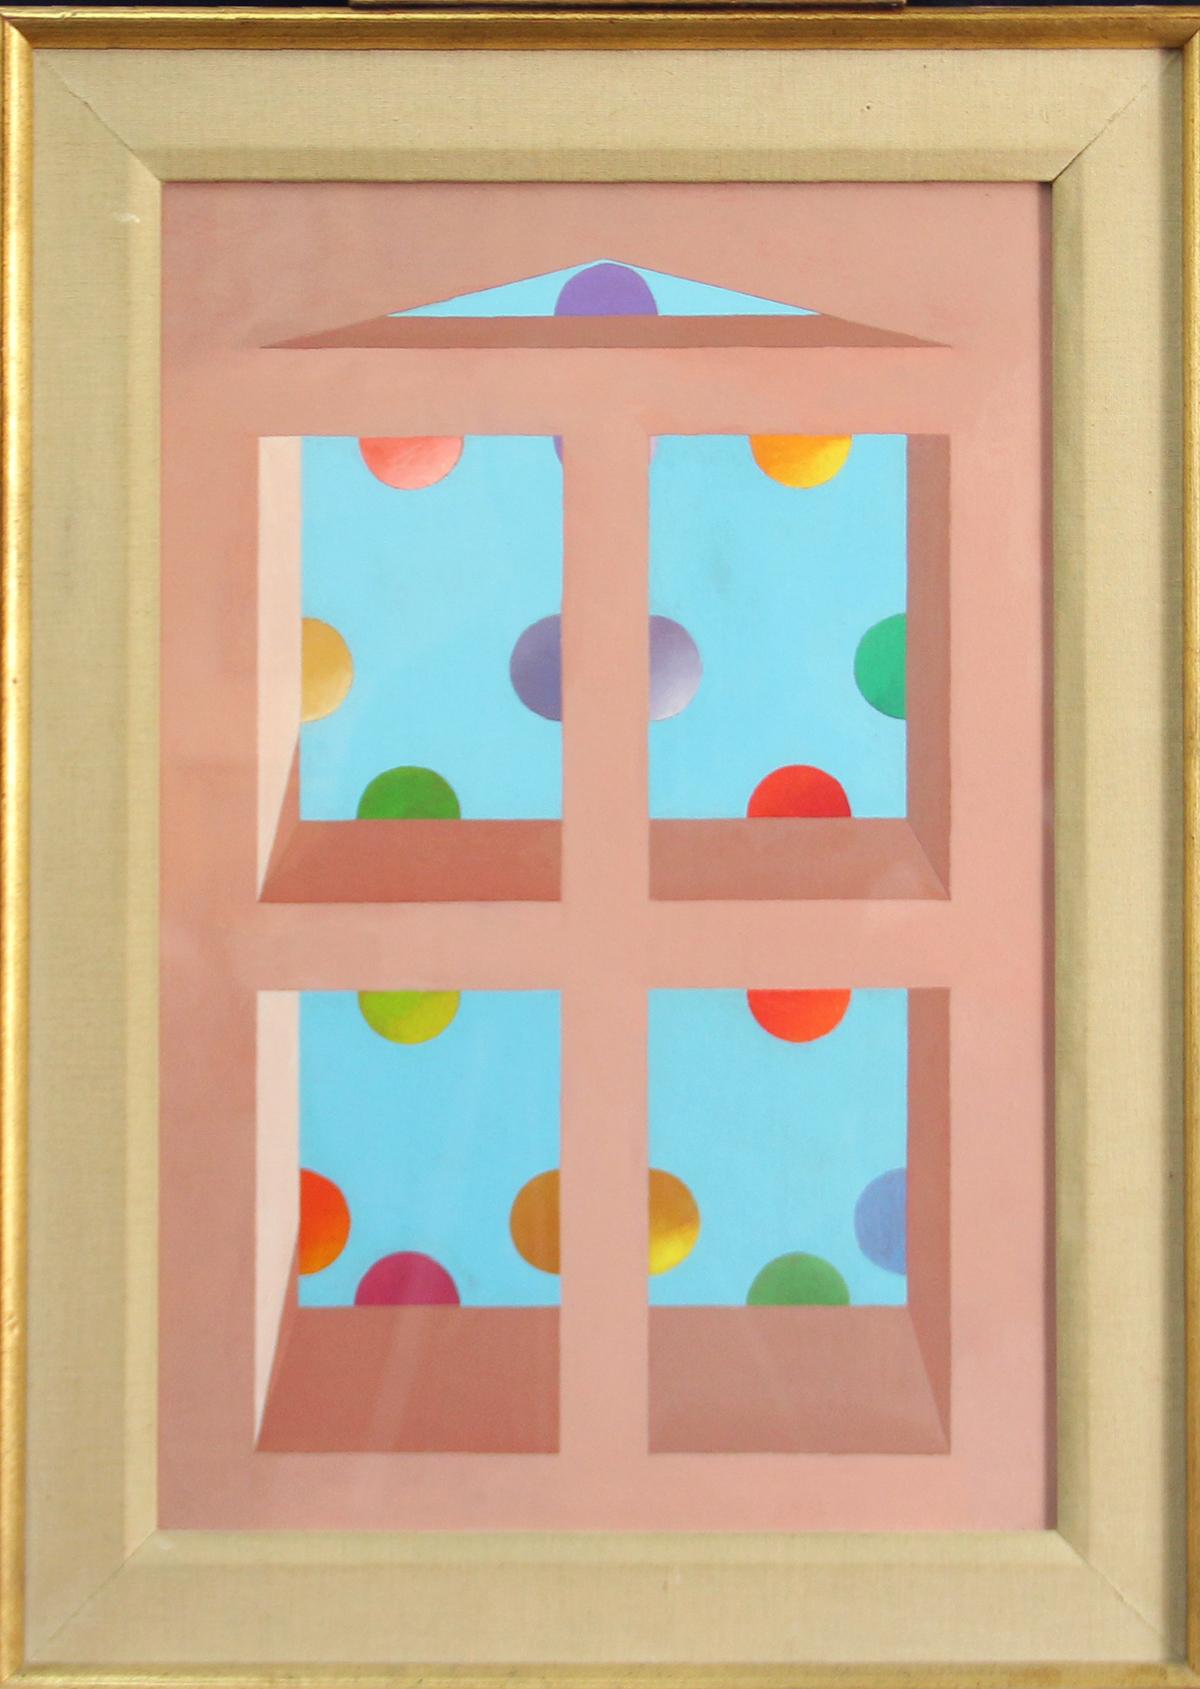 Hemispheres, Architectural Abstract, Geometric Forms in Color, Oil on Paper - Painting by Joseph Amarotico